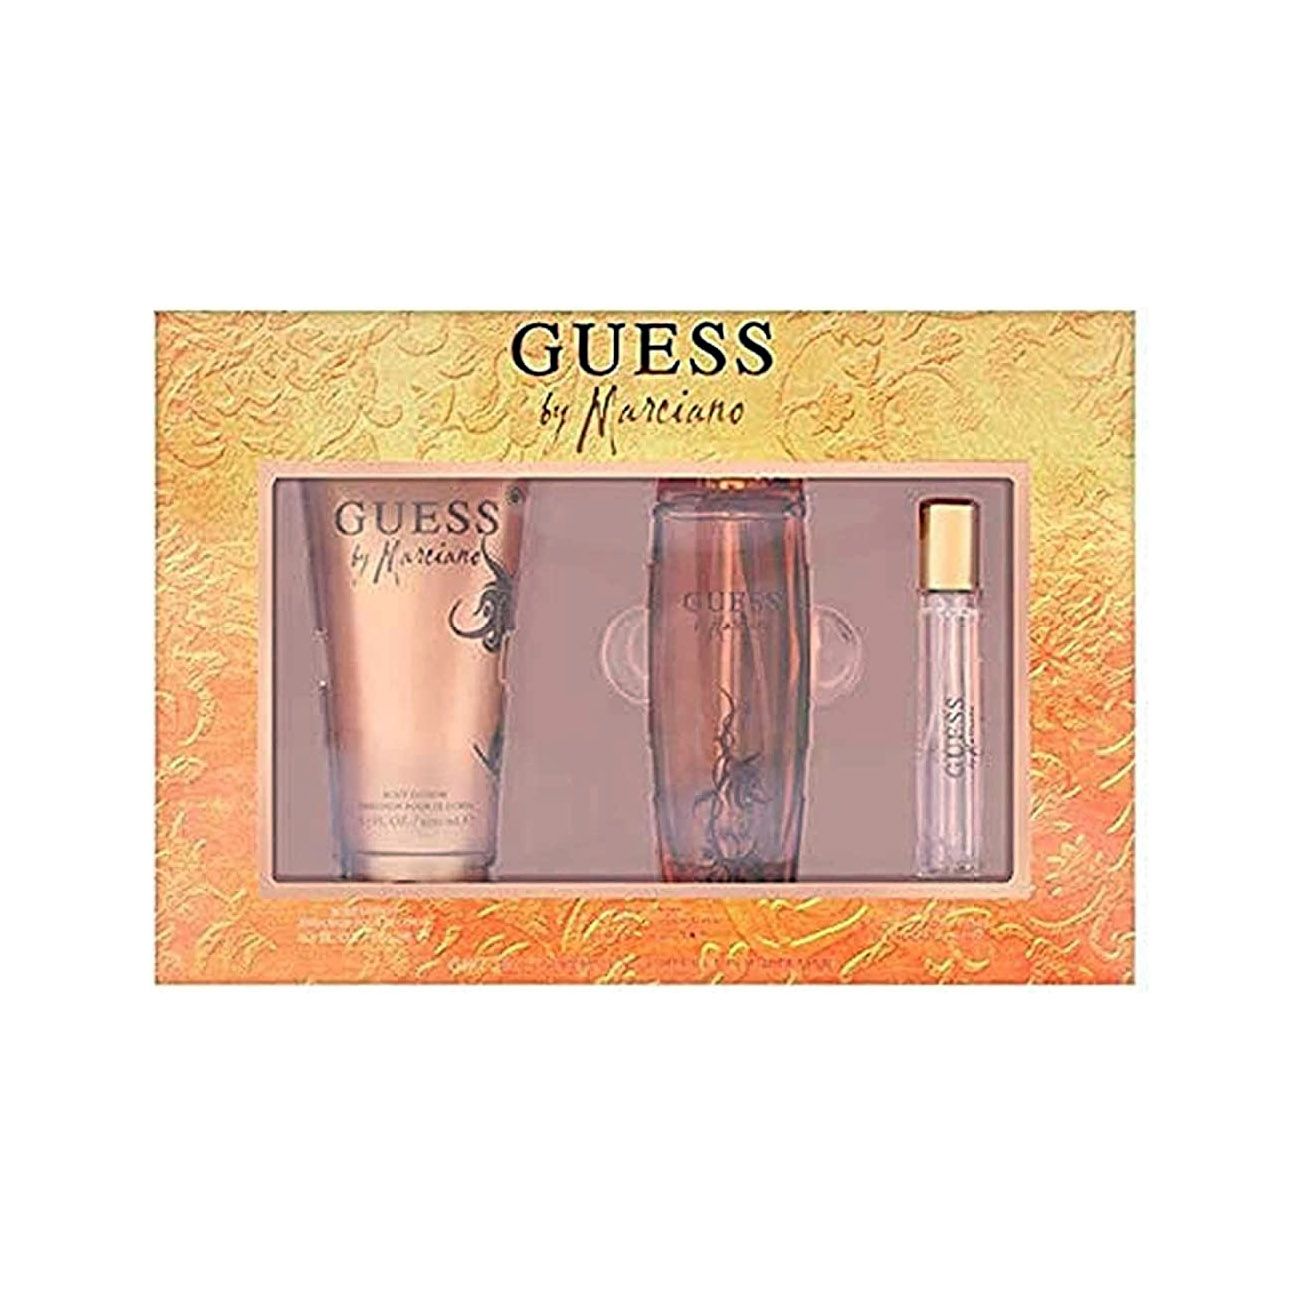 Guess Marciano 3 piece Gift Set for Women at Ratans Online Shop - Perfumes Wholesale and Retailer Gift Set